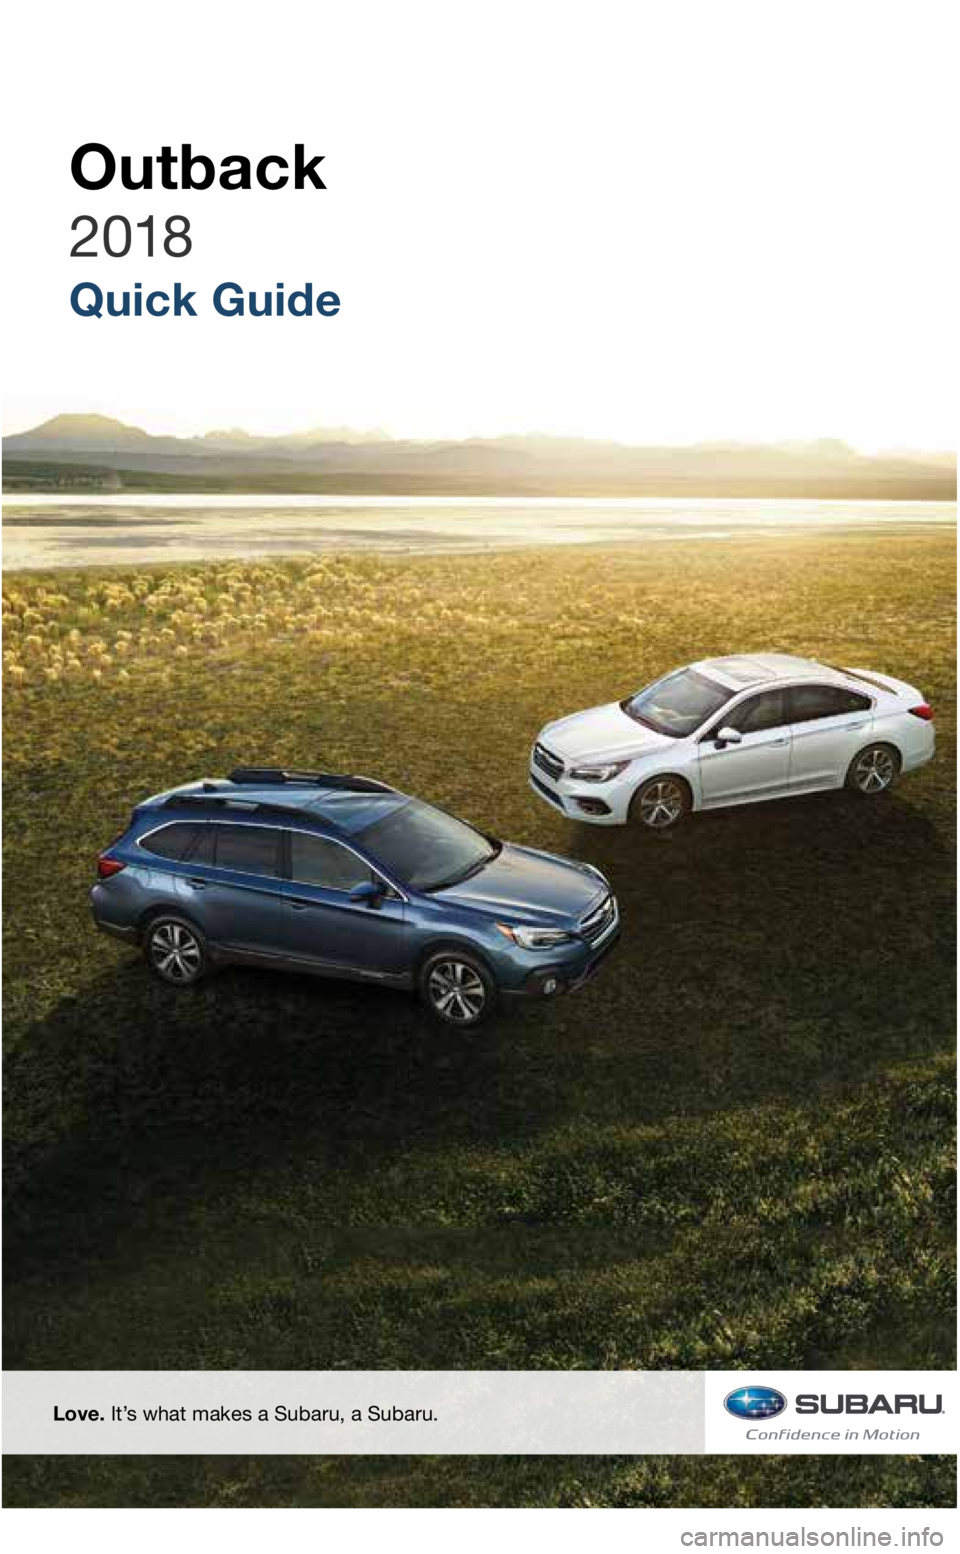 SUBARU OUTBACK 2018  Quick Guide Quick Guide
Outback
Love. It’s what makes a Subaru, a Subaru.
2926966_18a_Subaru_Outback_QRG_050417.indd   25/4/17   3:34 PM
2018   